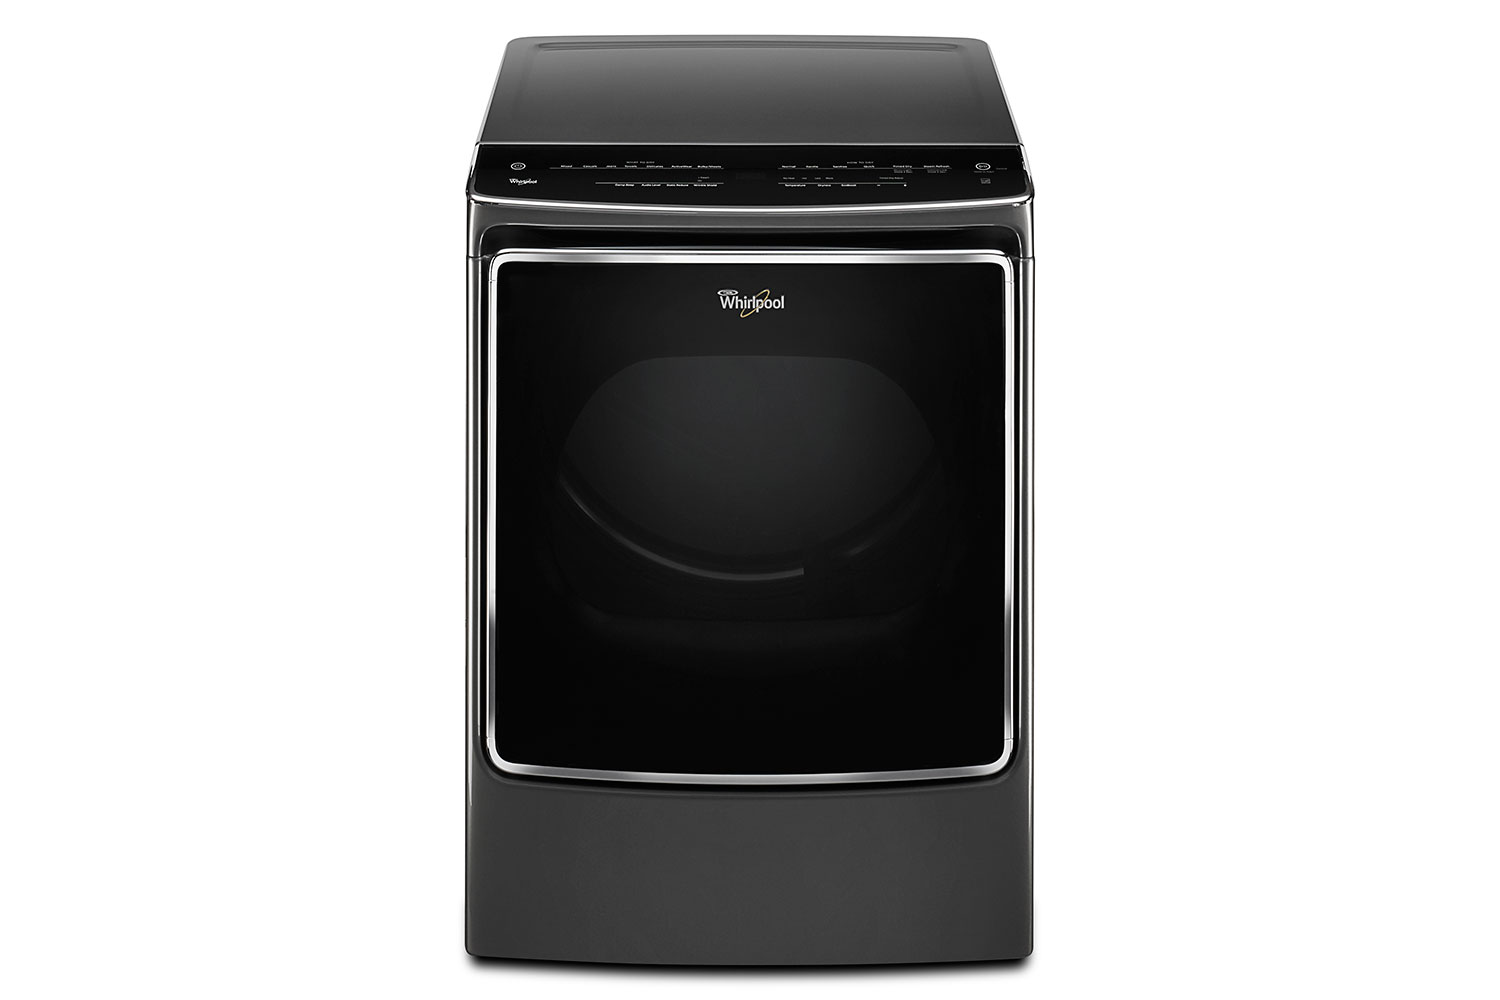 whirlpools smart appliances work with nest and amazon dash whirlpool advantage laundry paire p150355 4z